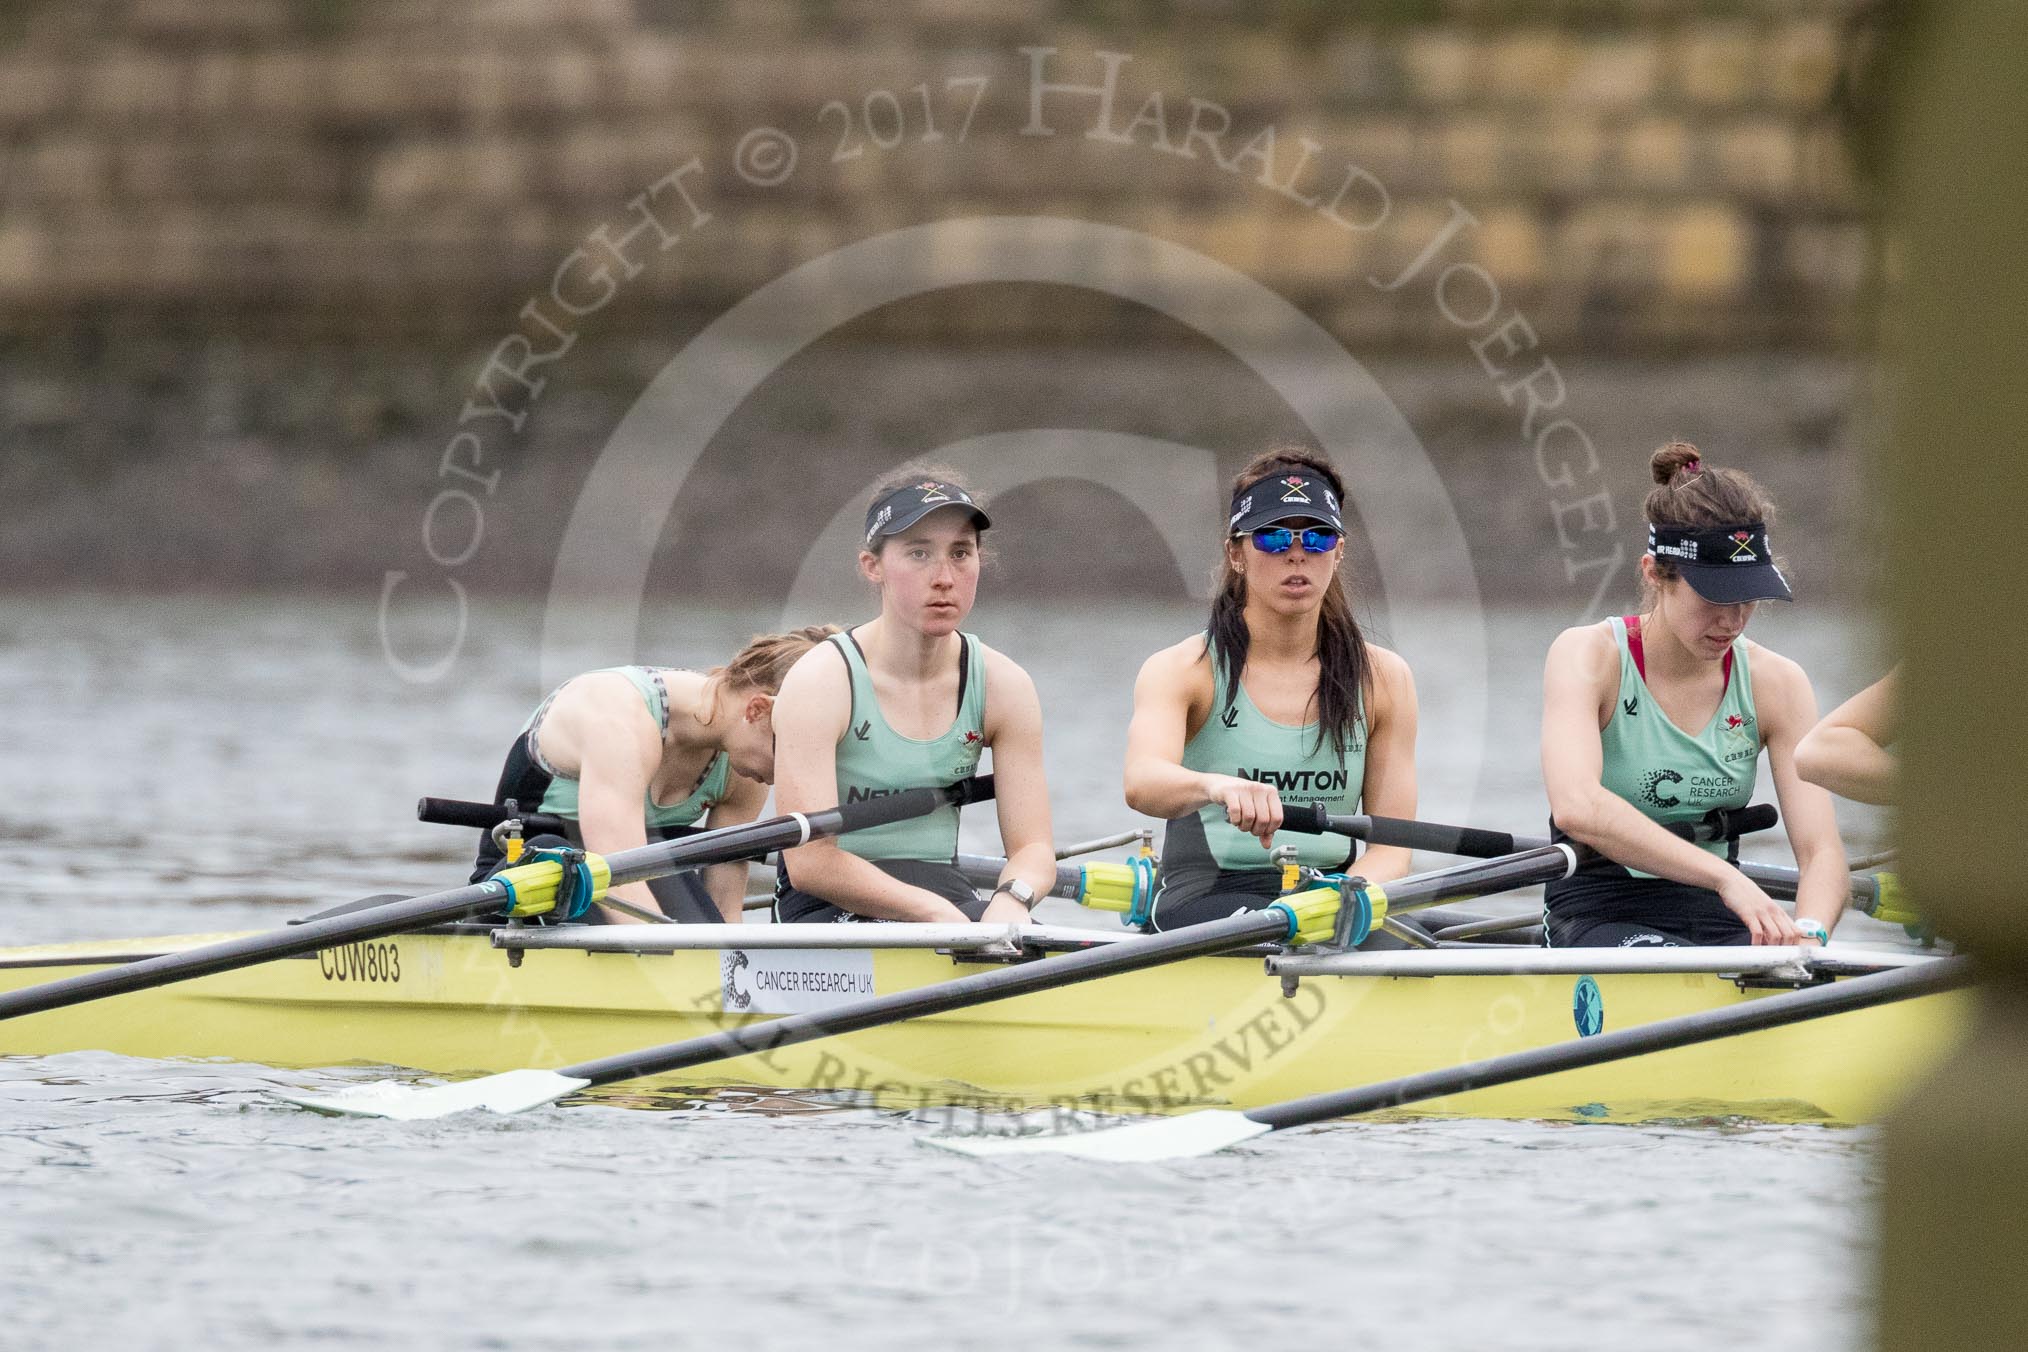 The Boat Race season 2017 - Women's Boat Race Fixture CUWBC vs Univerity of London: The CUWBC lightweight squad about tro race the UL 2nd eight, here bos - Ellie Thompson, 2 - Isobel Edwards, 3 - Rosie Boxall, 4 - Fenella McLuskie.
River Thames between Putney Bridge and Mortlake,
London SW15,

United Kingdom,
on 19 February 2017 at 15:45, image #24